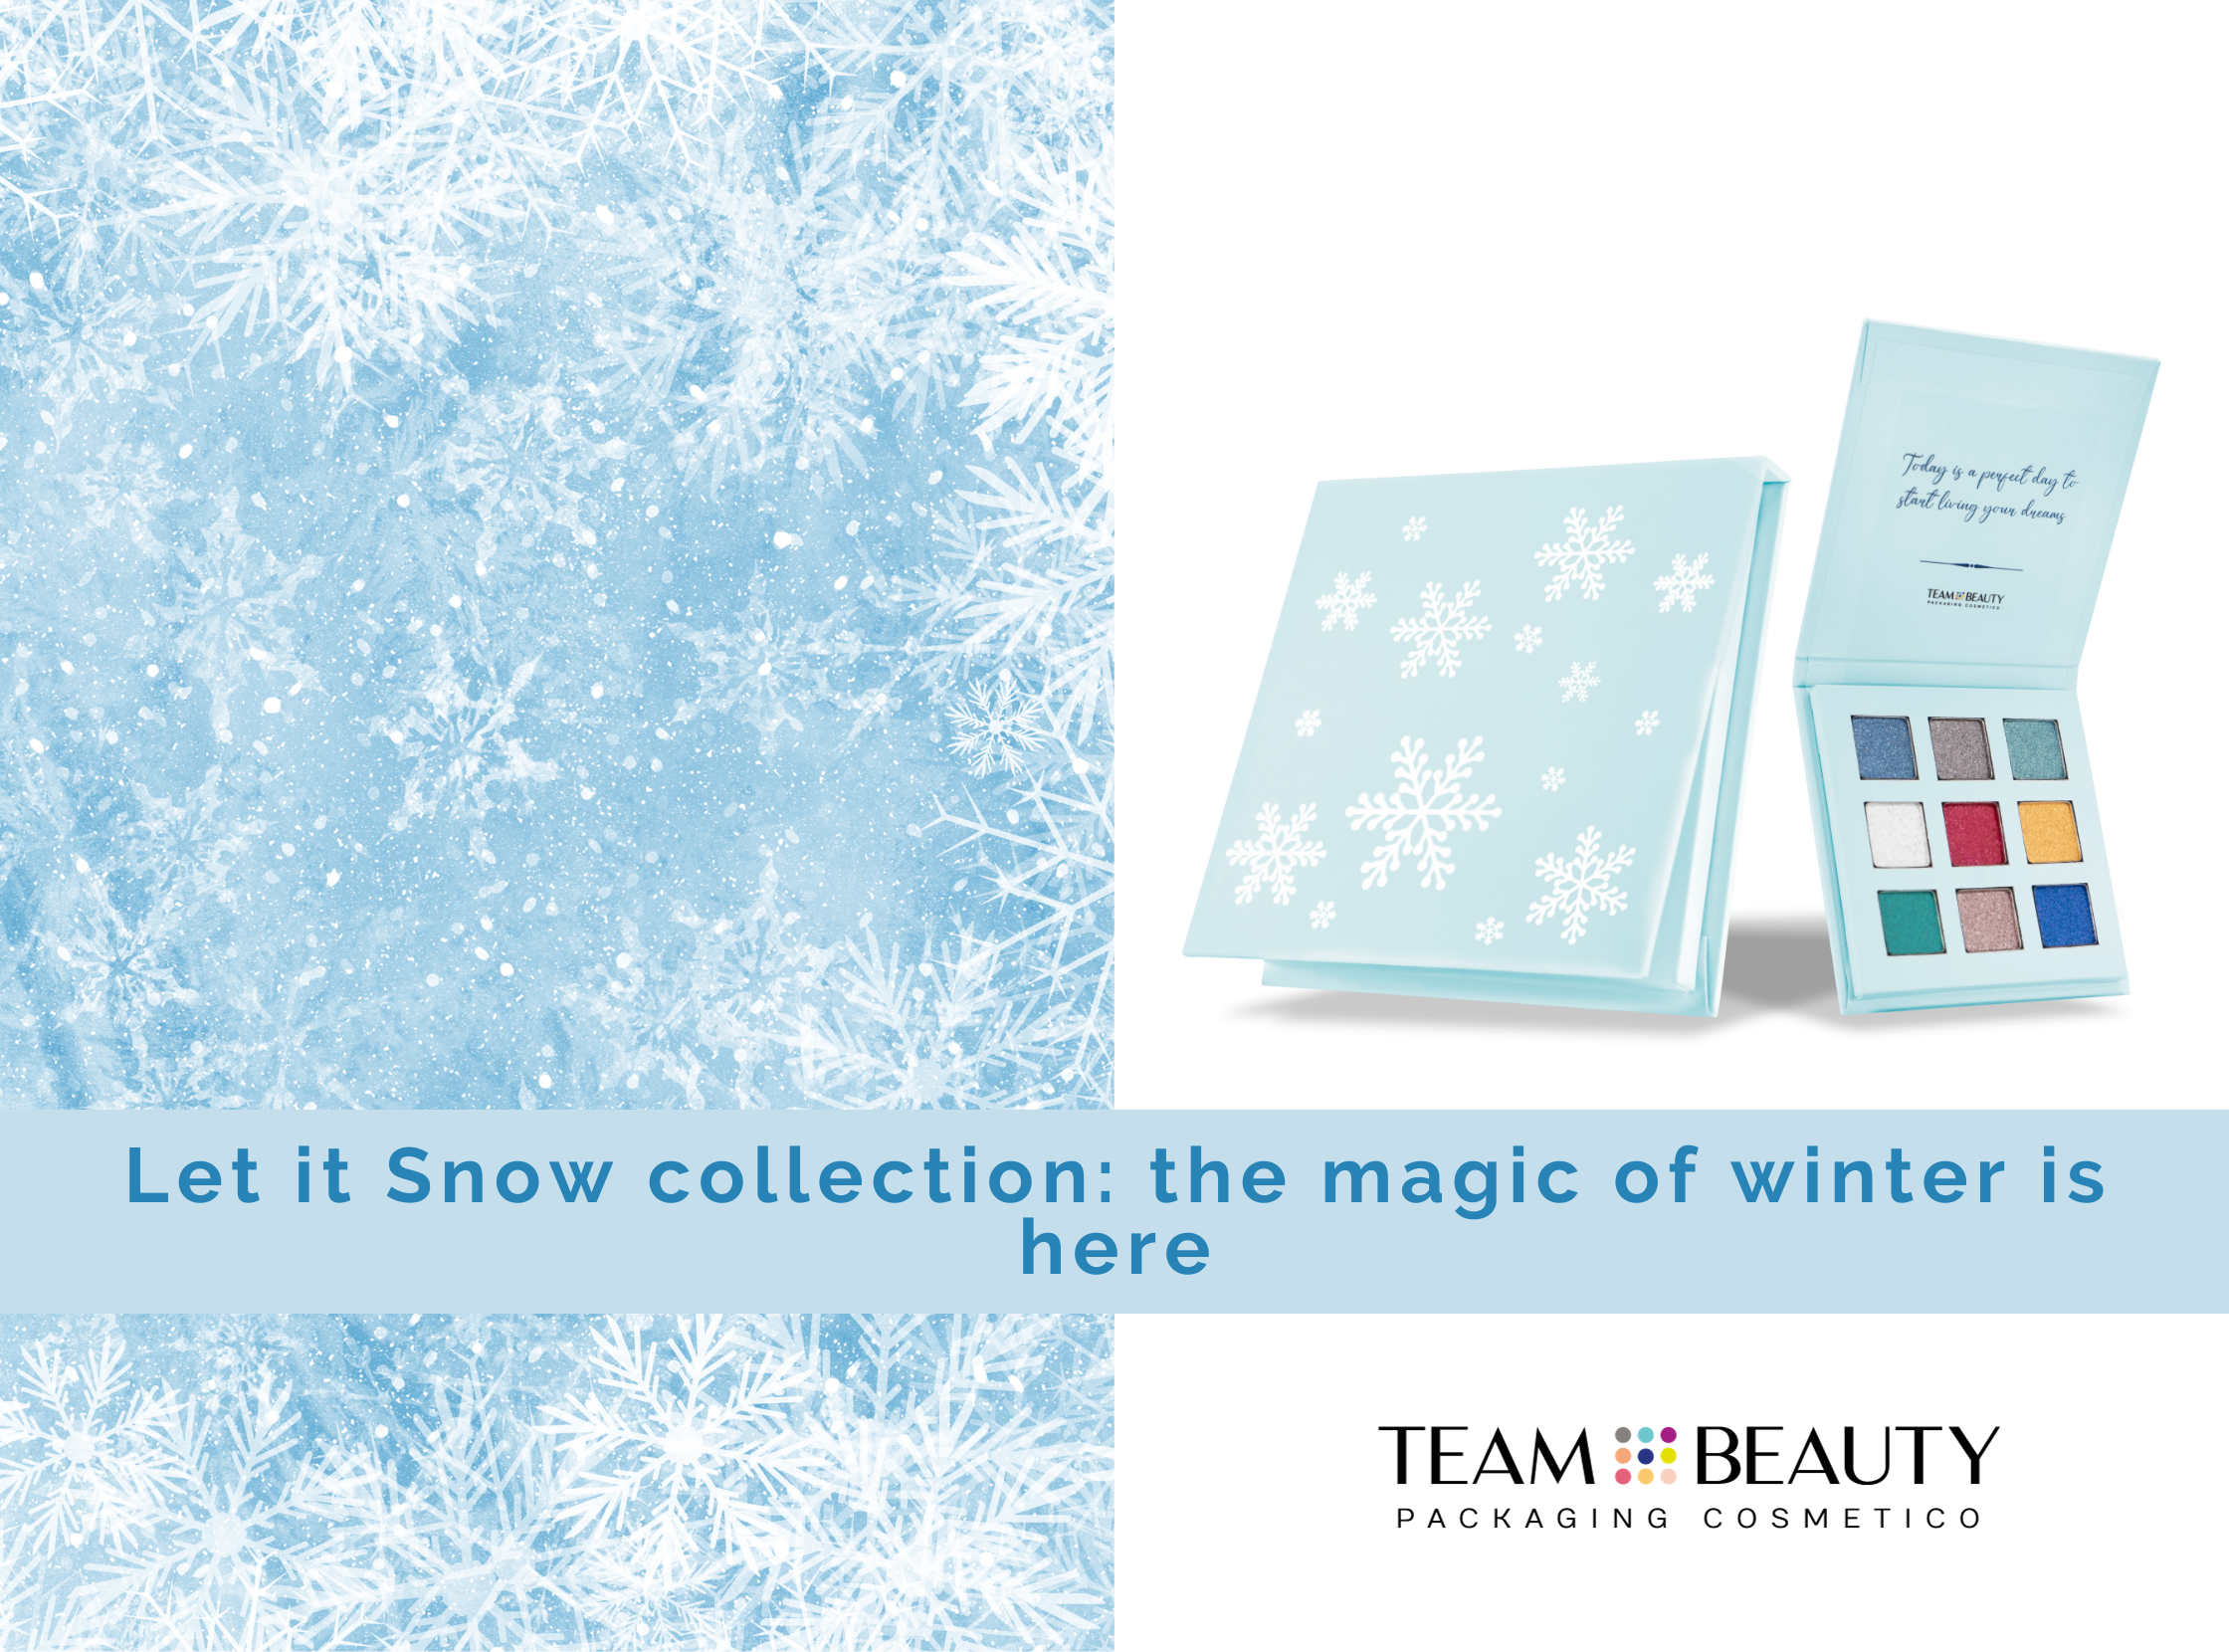 Let it Snow collection: the magic of winter is here